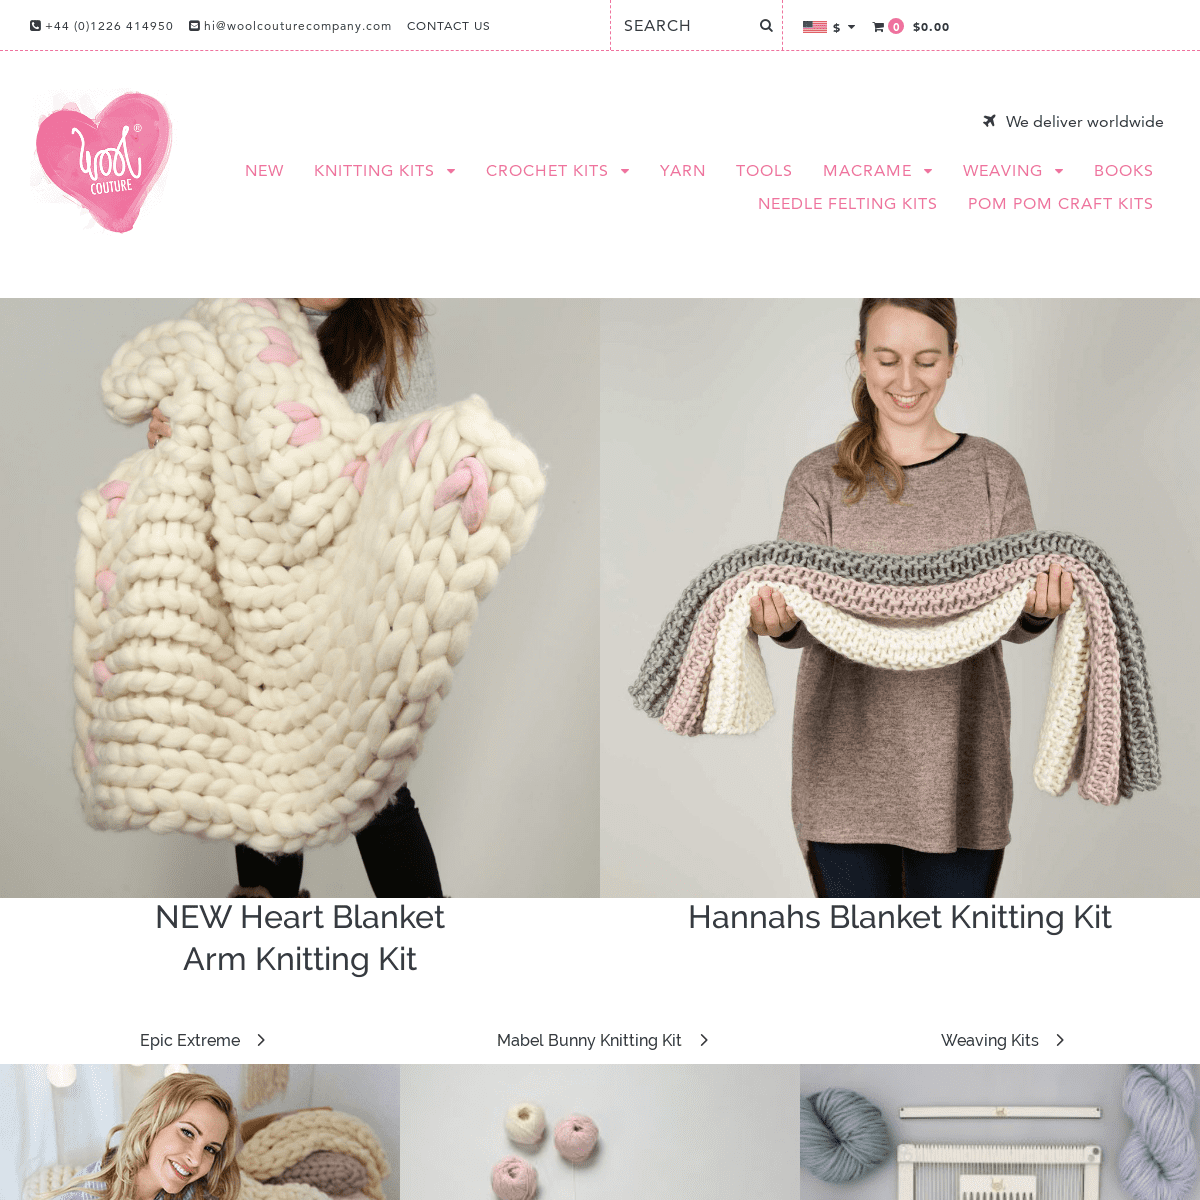 A complete backup of woolcouturecompany.com